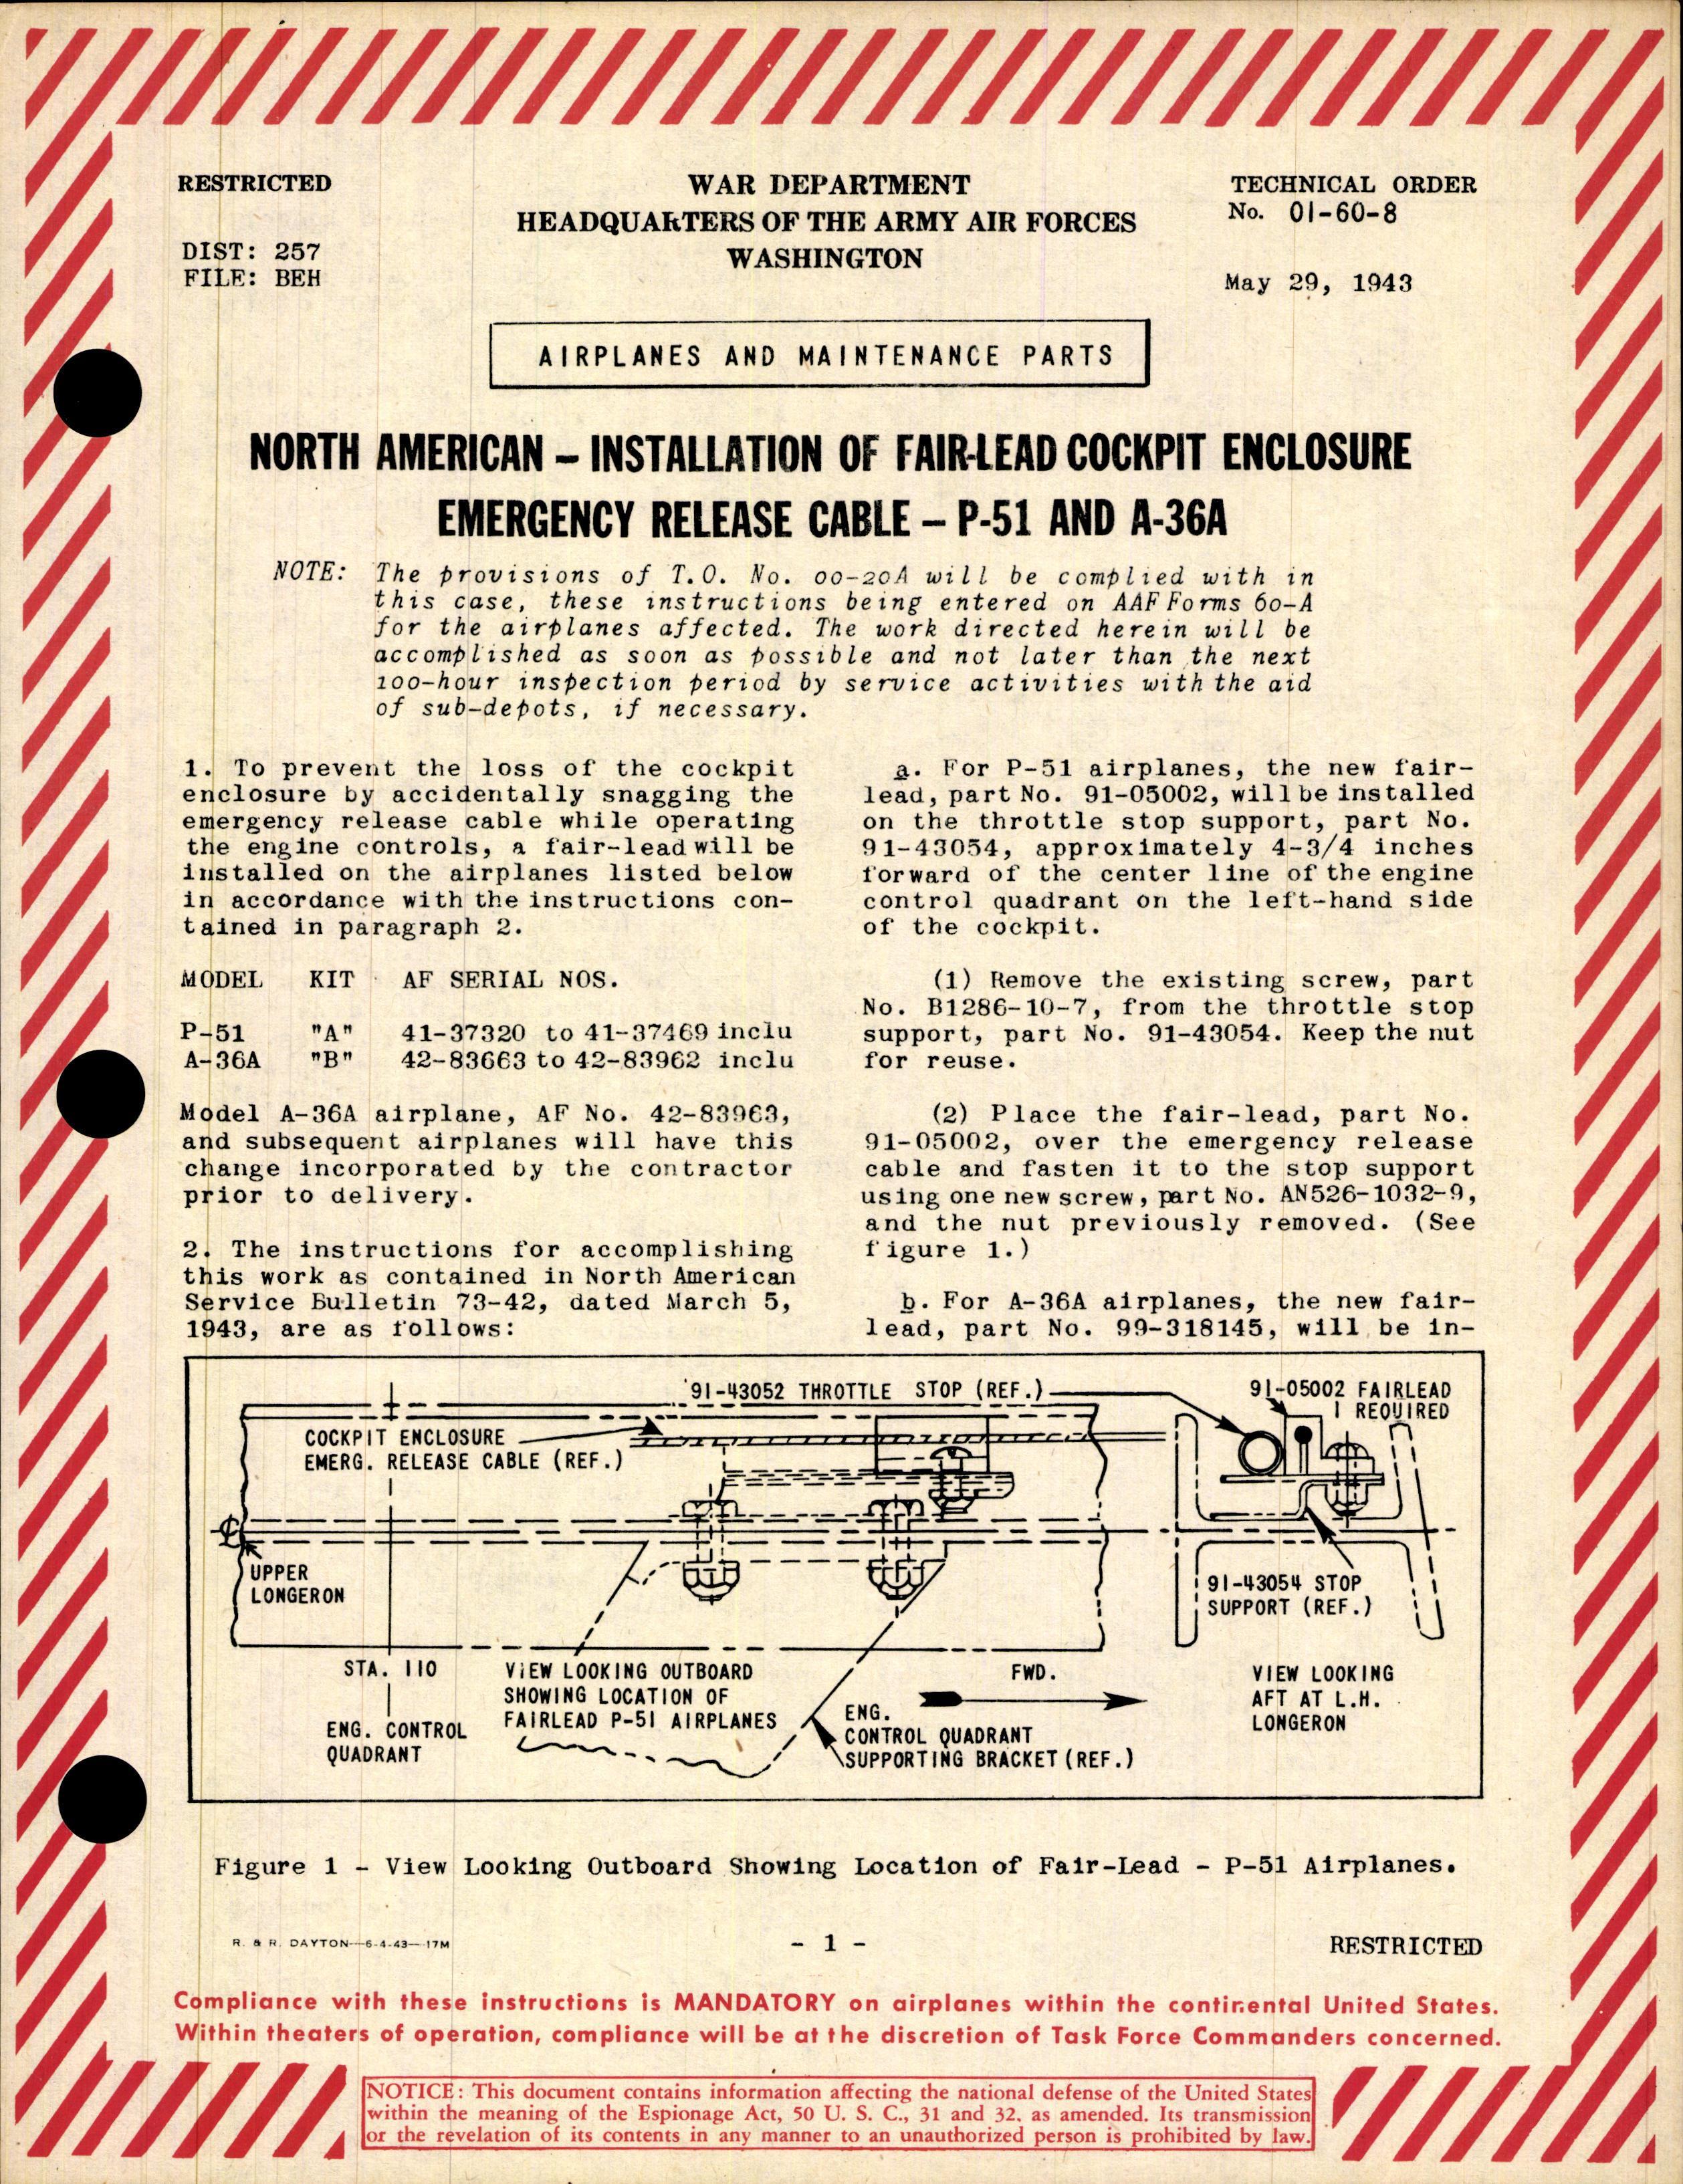 Sample page 1 from AirCorps Library document: Installation of Fair-Lead Cockpit Enclosure Emergency Release Cable for P-51 and A-36A